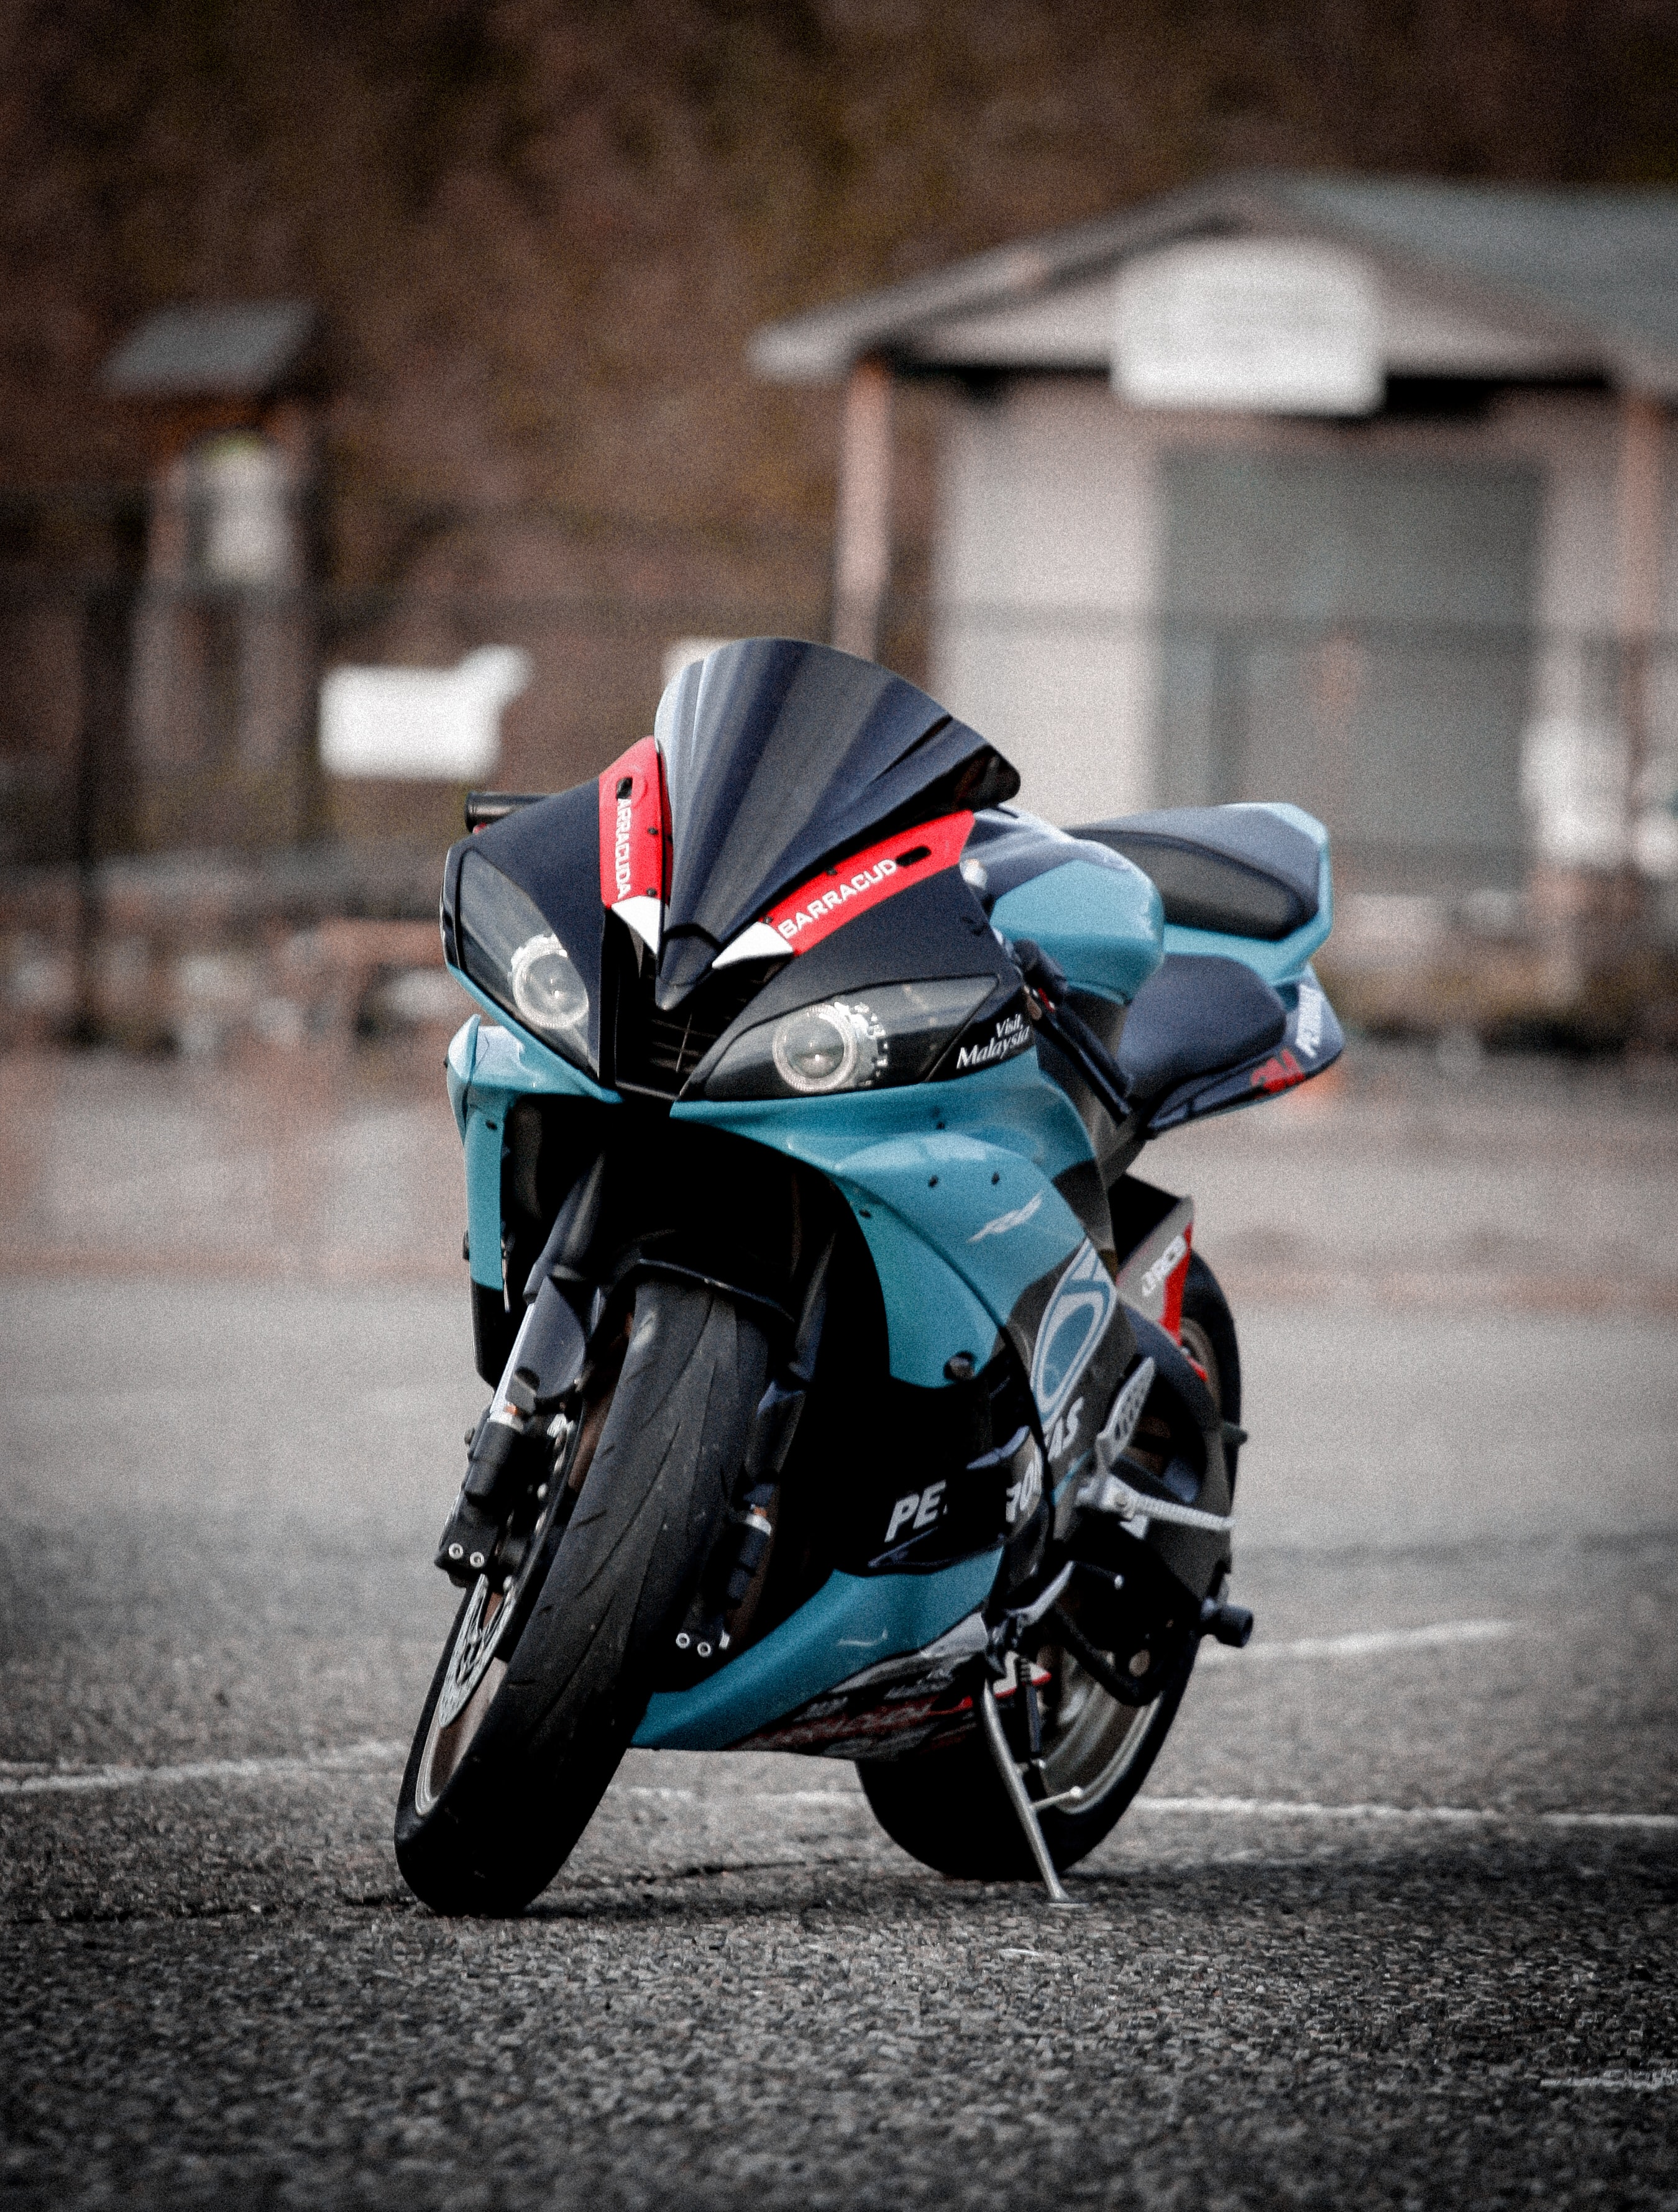 front view, blue, sportbike, motorcycle collection of HD images